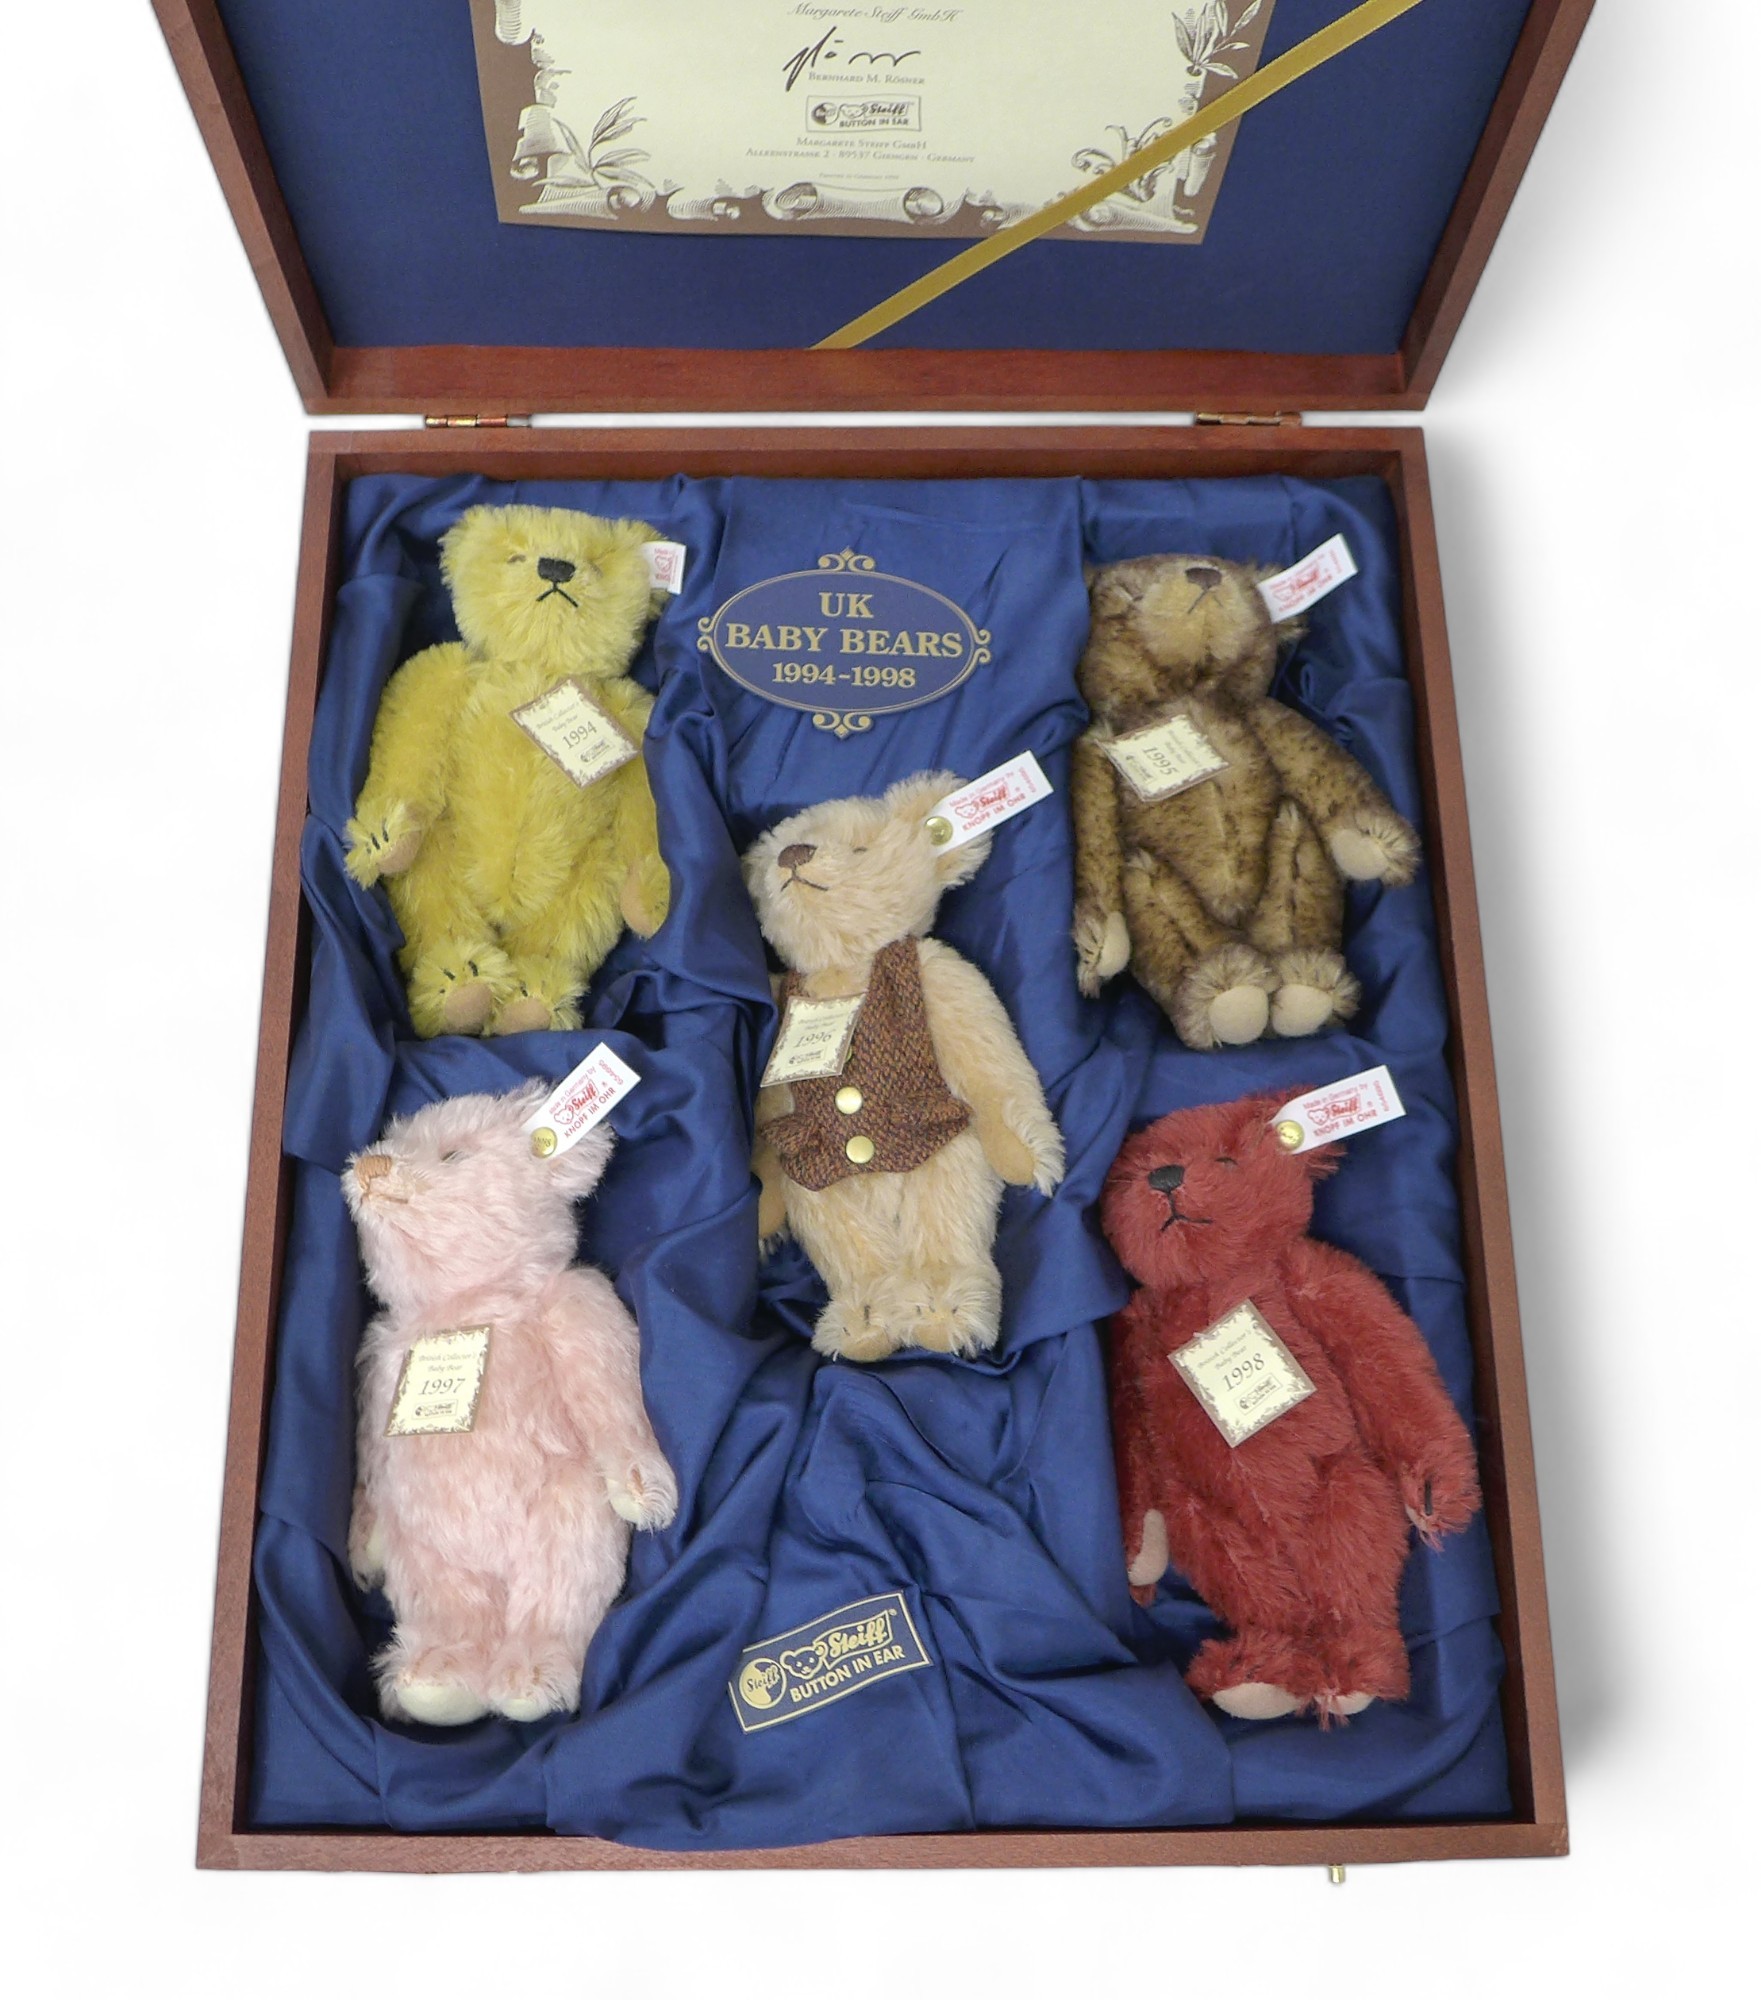 Steiff British Collectors Baby Bears 1994 - 1998 in presentation wooden box. Five 16cm bears with - Image 5 of 9